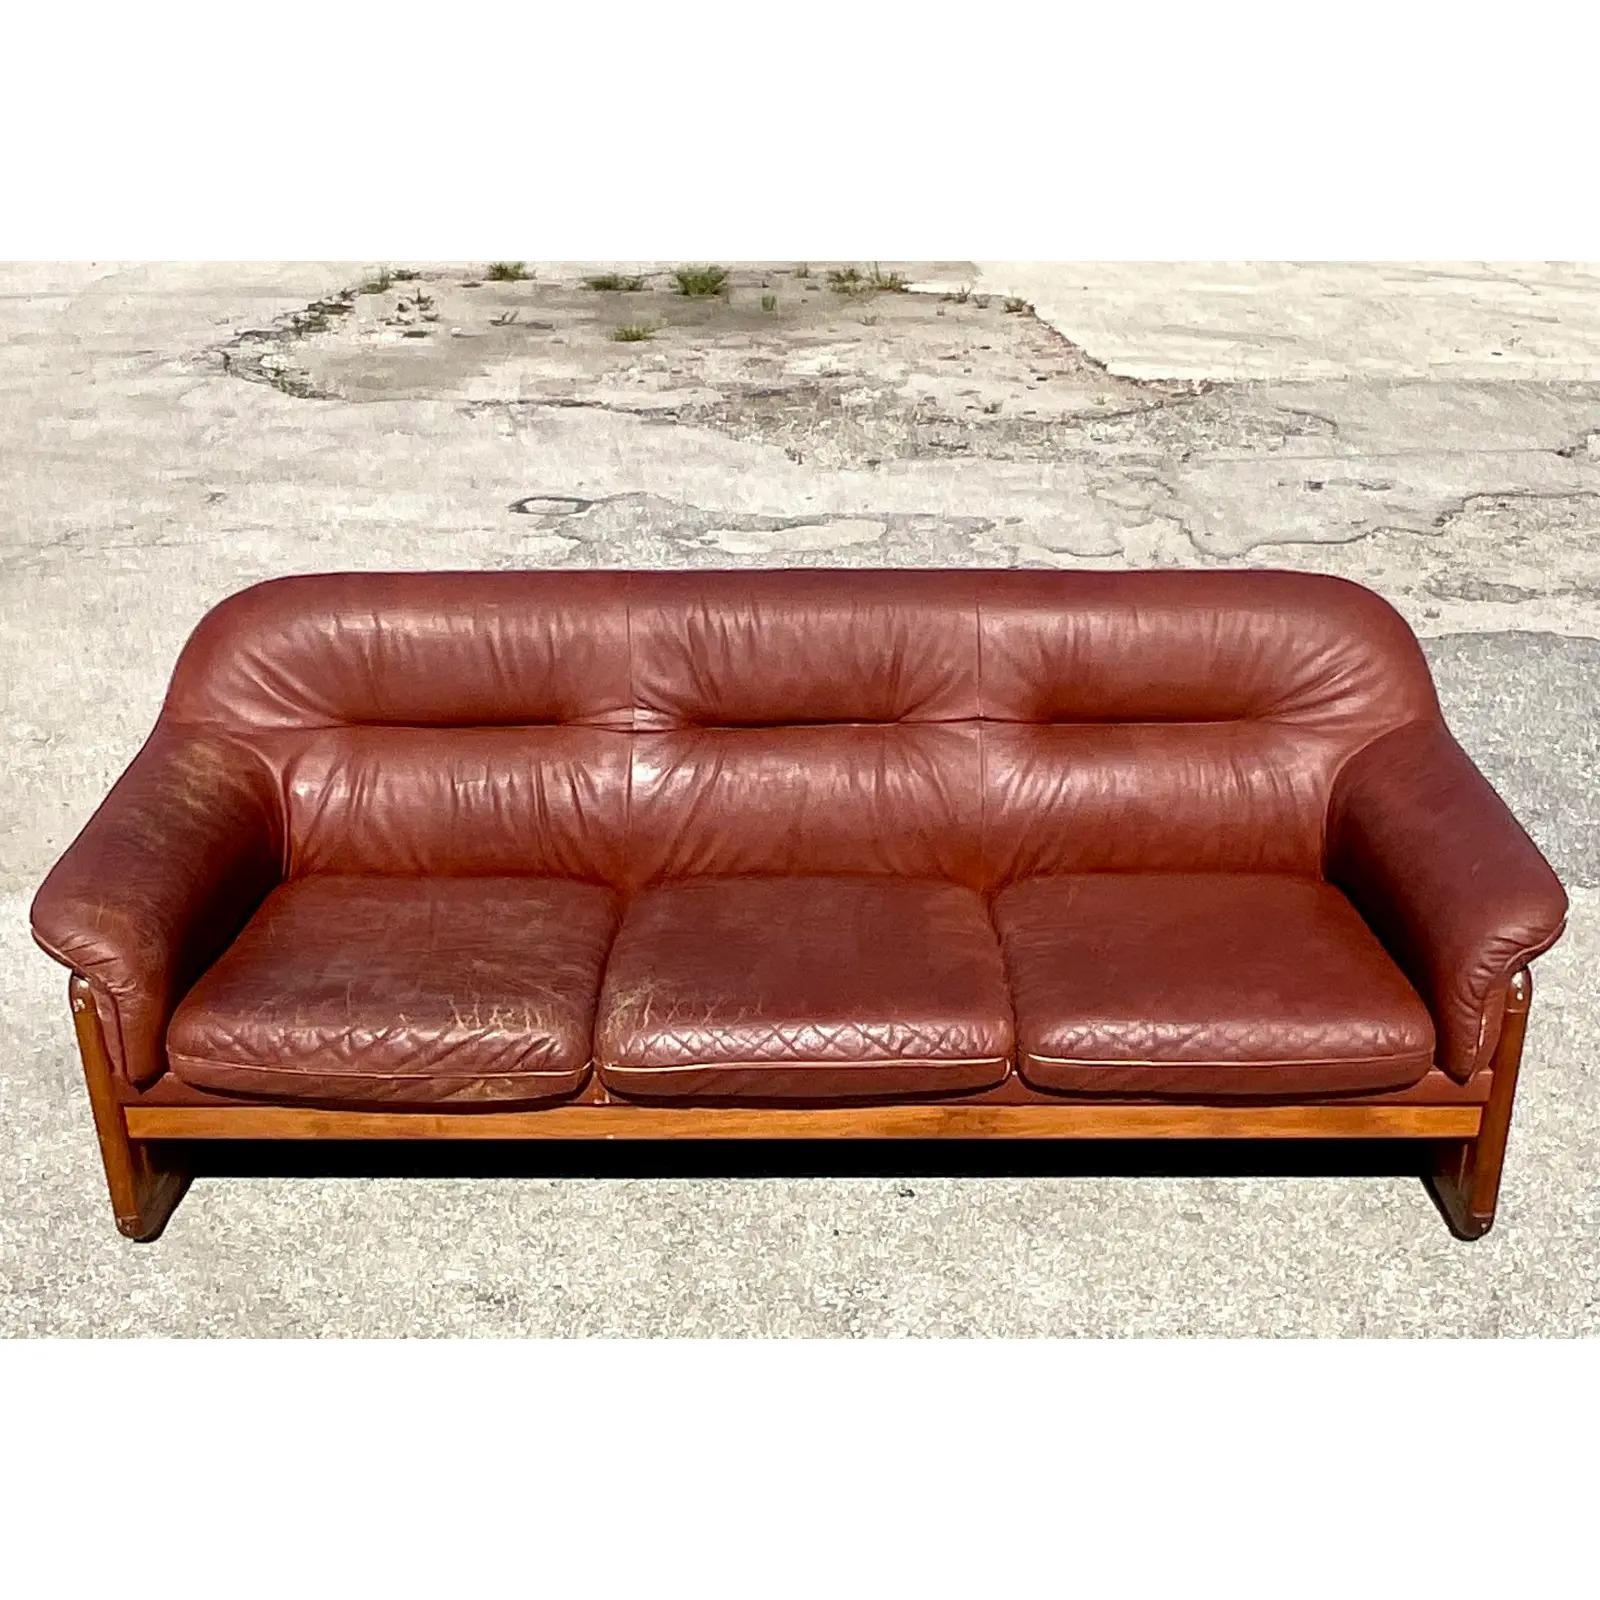 Vintage Midcentury leather sofa. Beautiful channel tufted design with a one piece cushion. Warm wood trim with inset leather panels. Acquired from a Palm Beach estate.